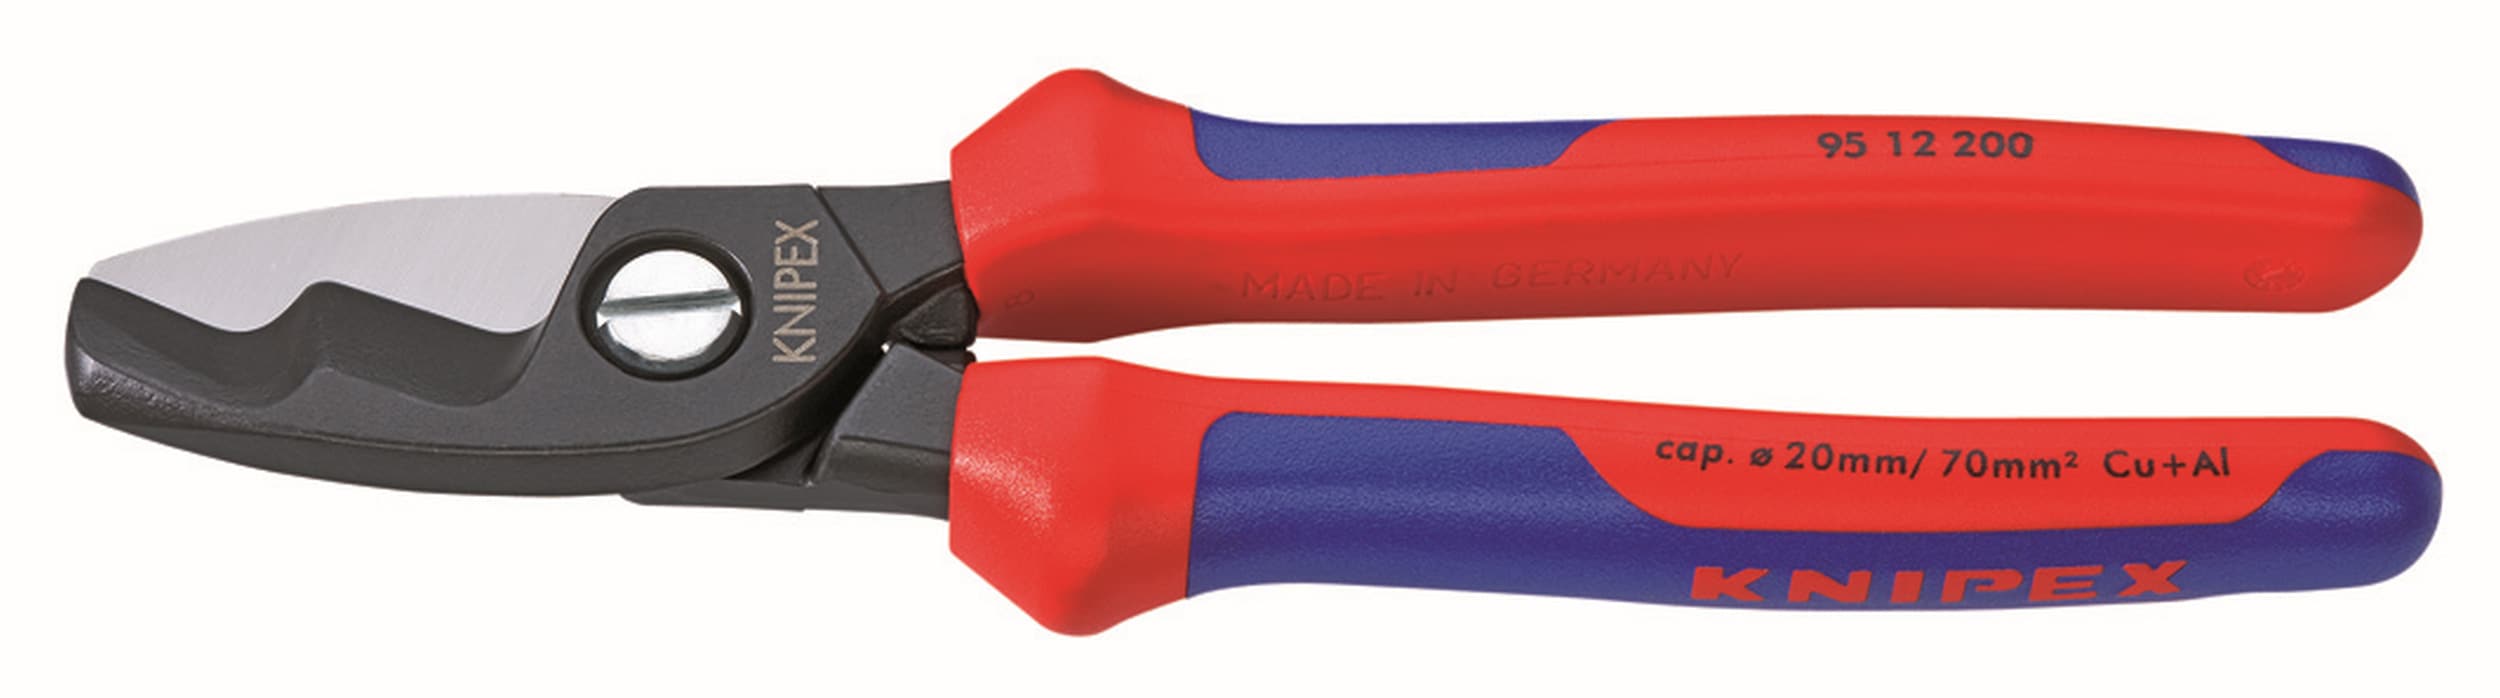 KNIPEX StepCut Cable Shears - Pro Tool Reviews